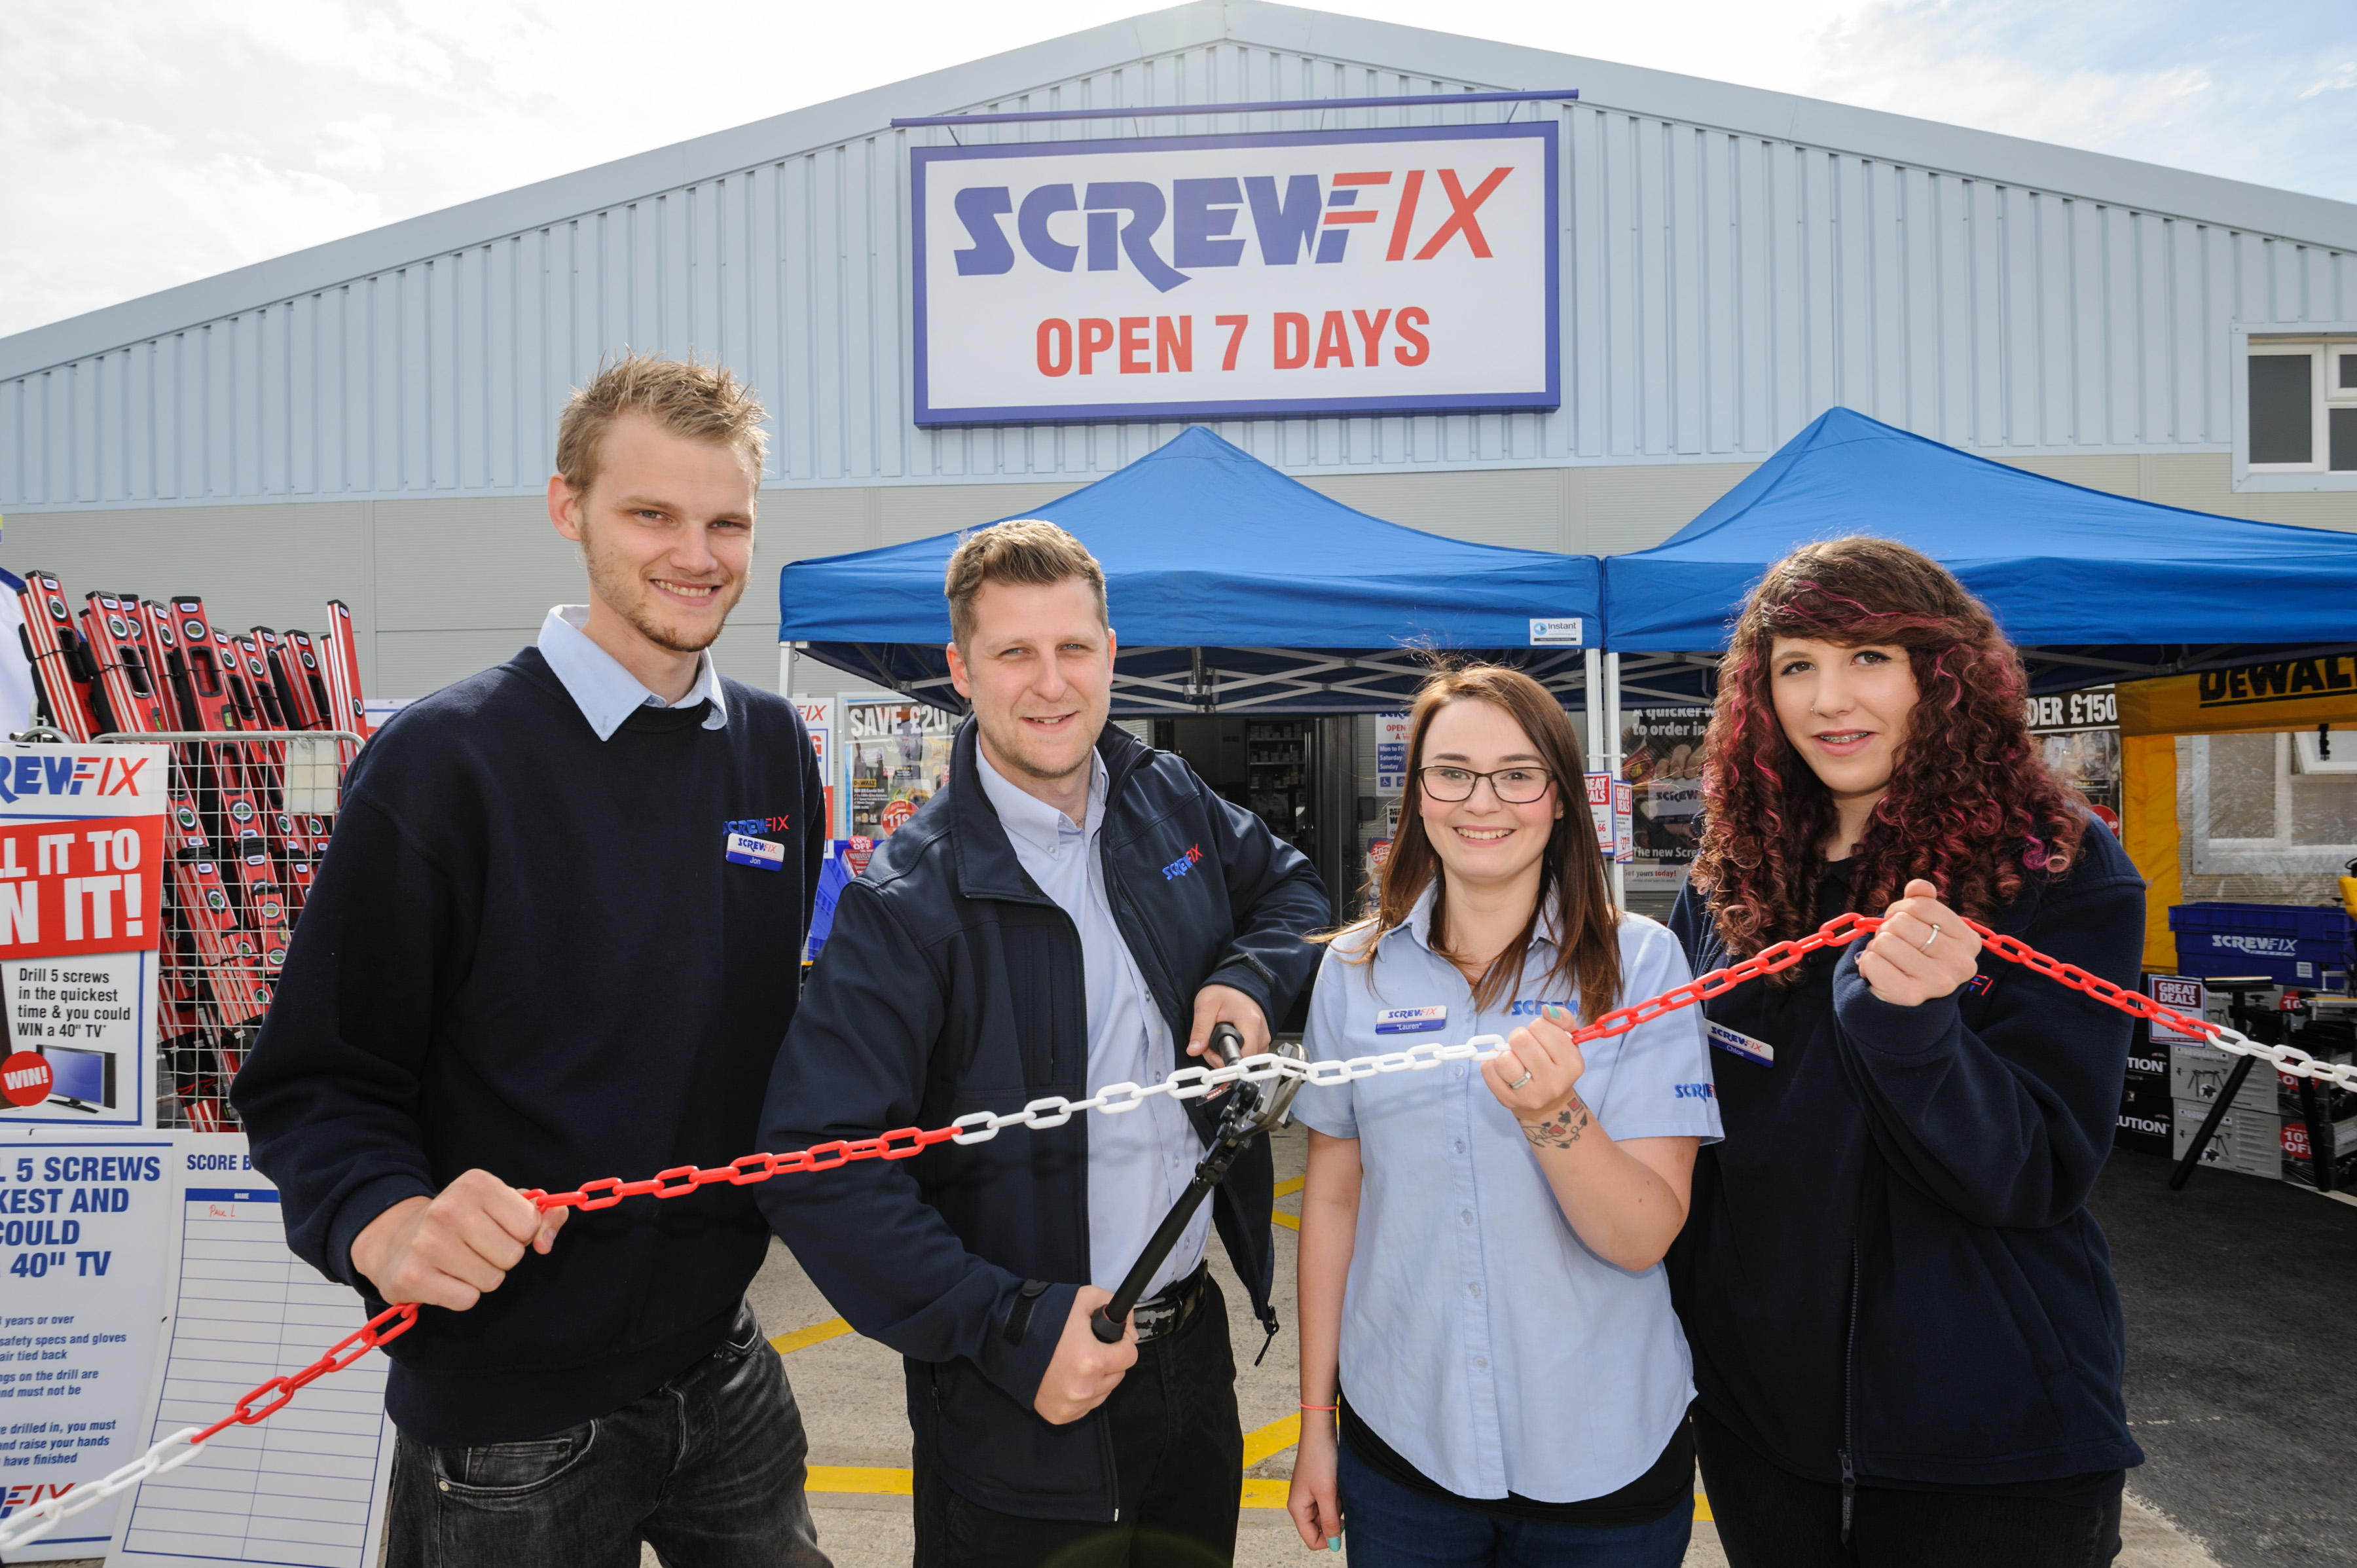 Faringdon’s first Screwfix store is declared a runaway success